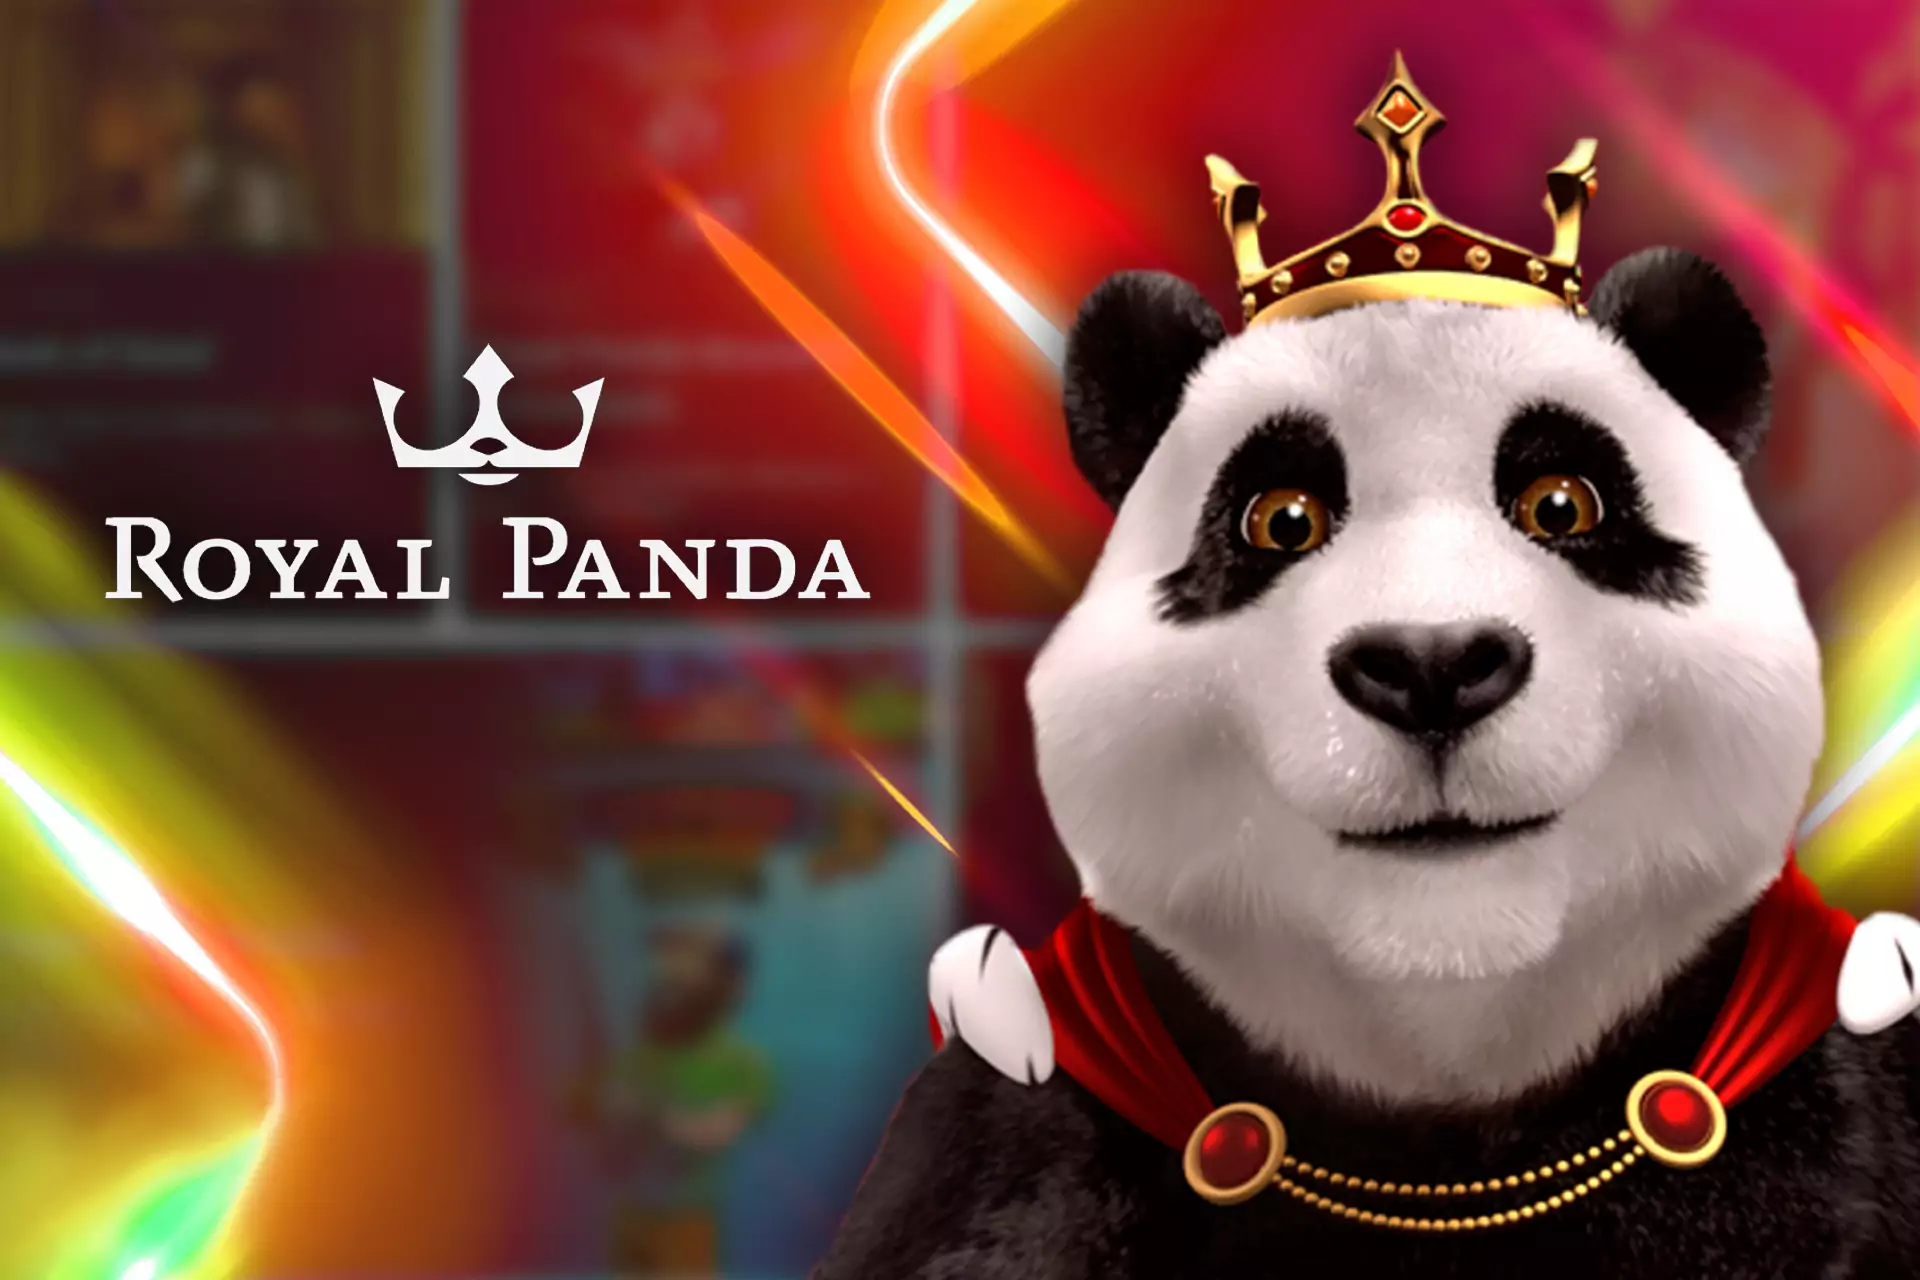 Royal Panda has been working since 2014 and proved that you can trust it.